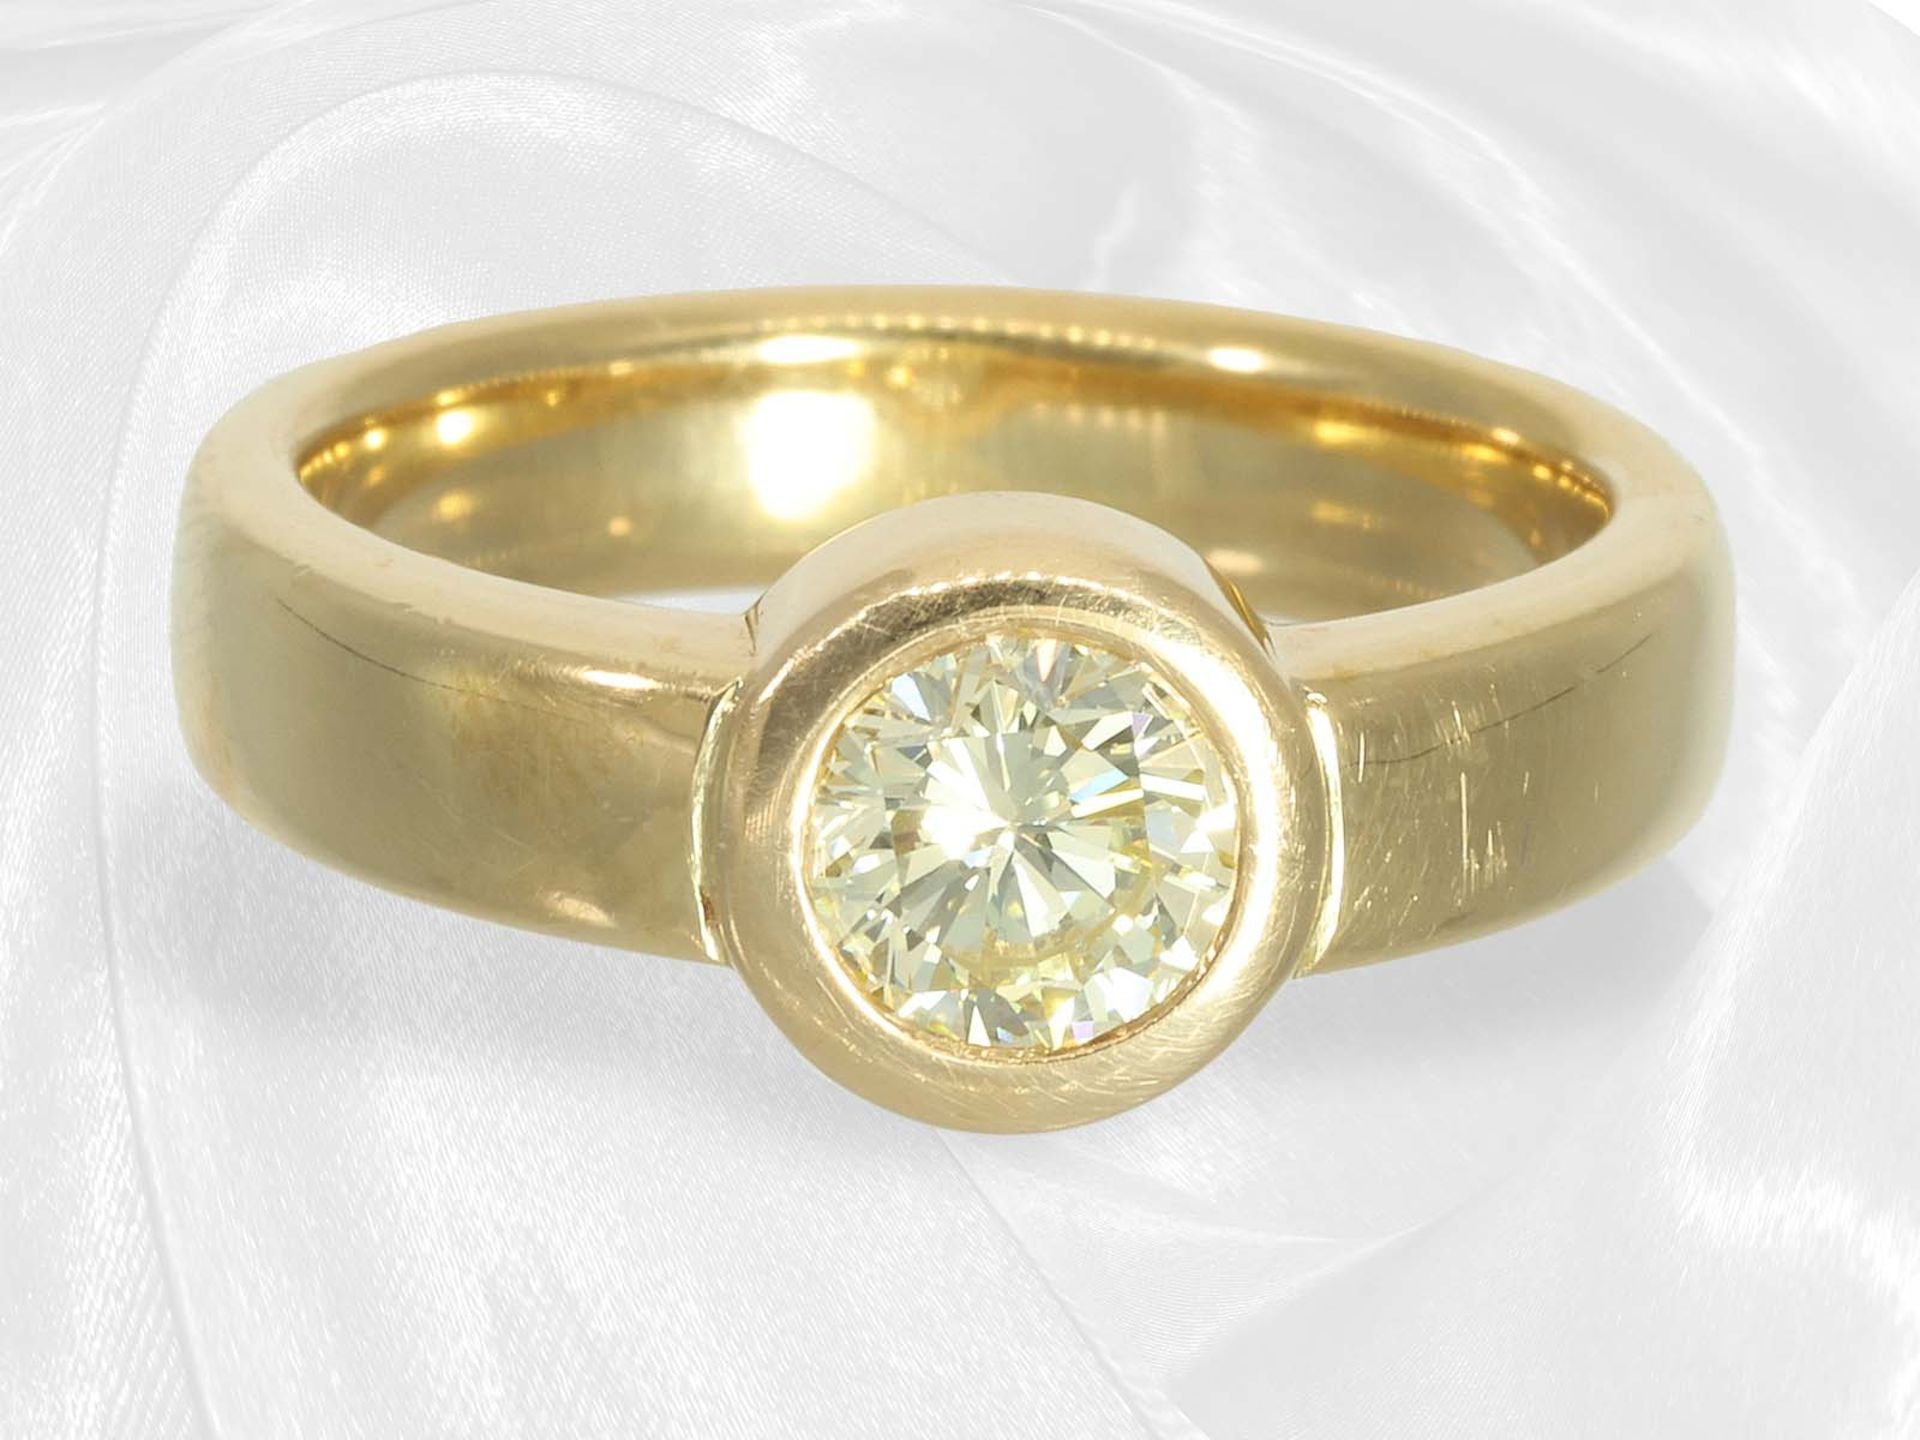 Solid solitaire goldsmith ring with a brilliant-cut diamond of approx. 0.65ct - Image 3 of 4